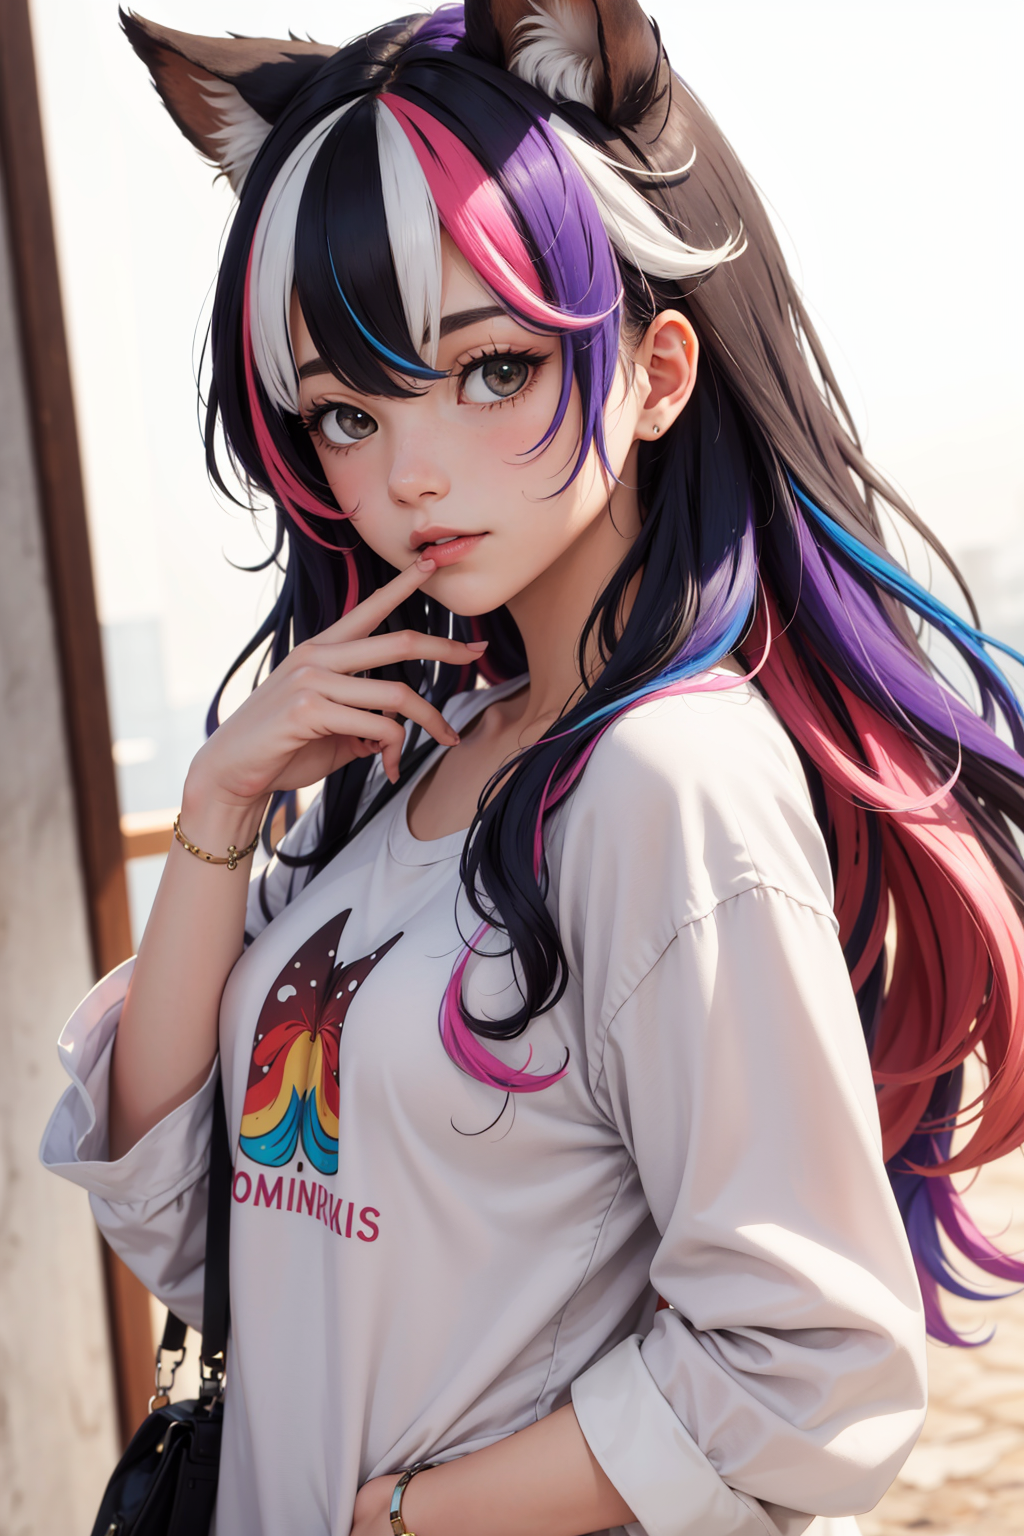 Anime girl with a pink and blue hair and a white shirt posing.